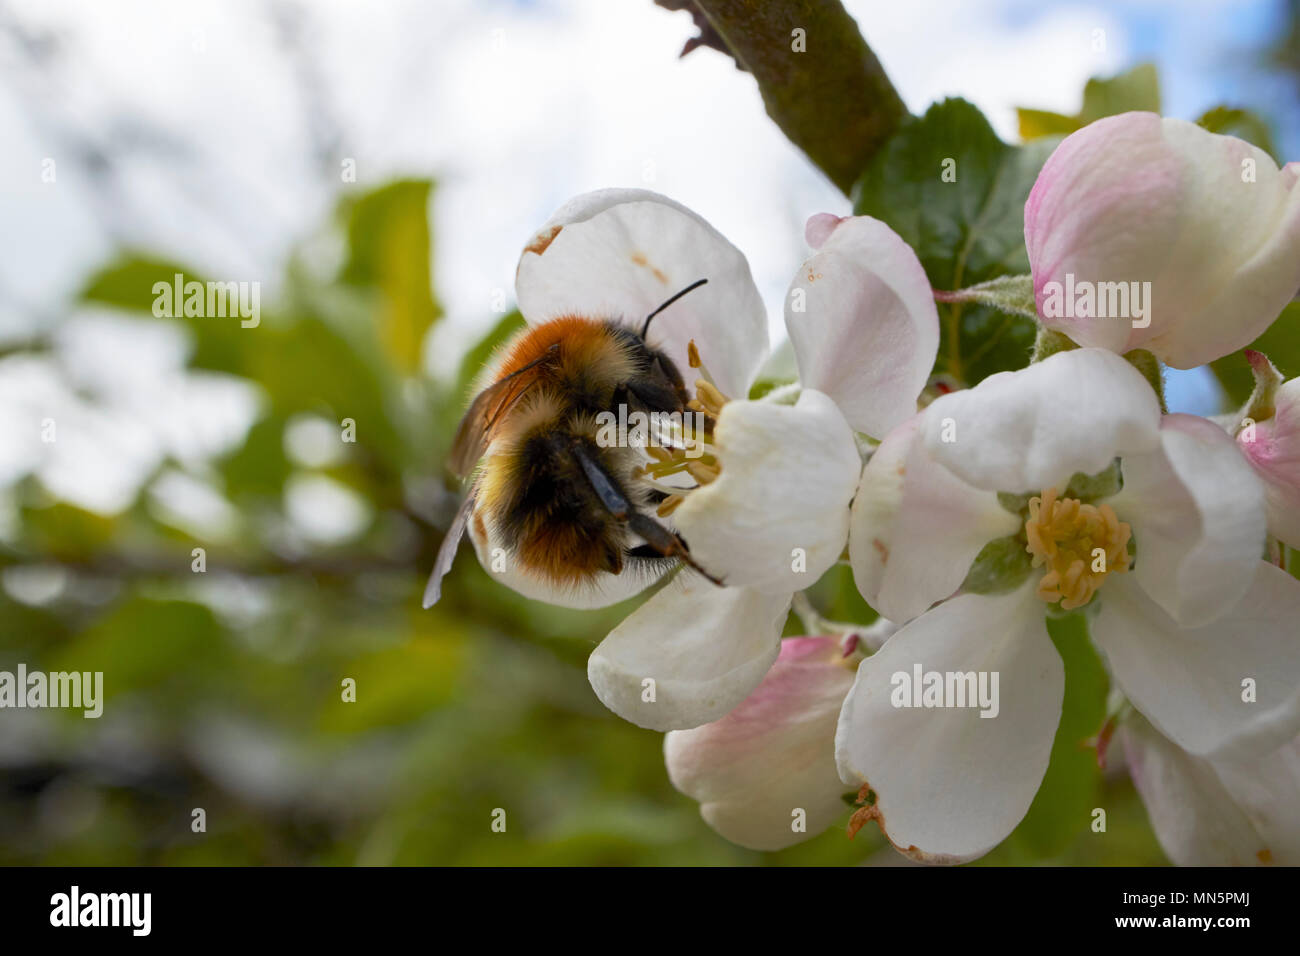 bumblebee pollinating apple blossoms on a domestic apple tree in spring in a garden UK Stock Photo